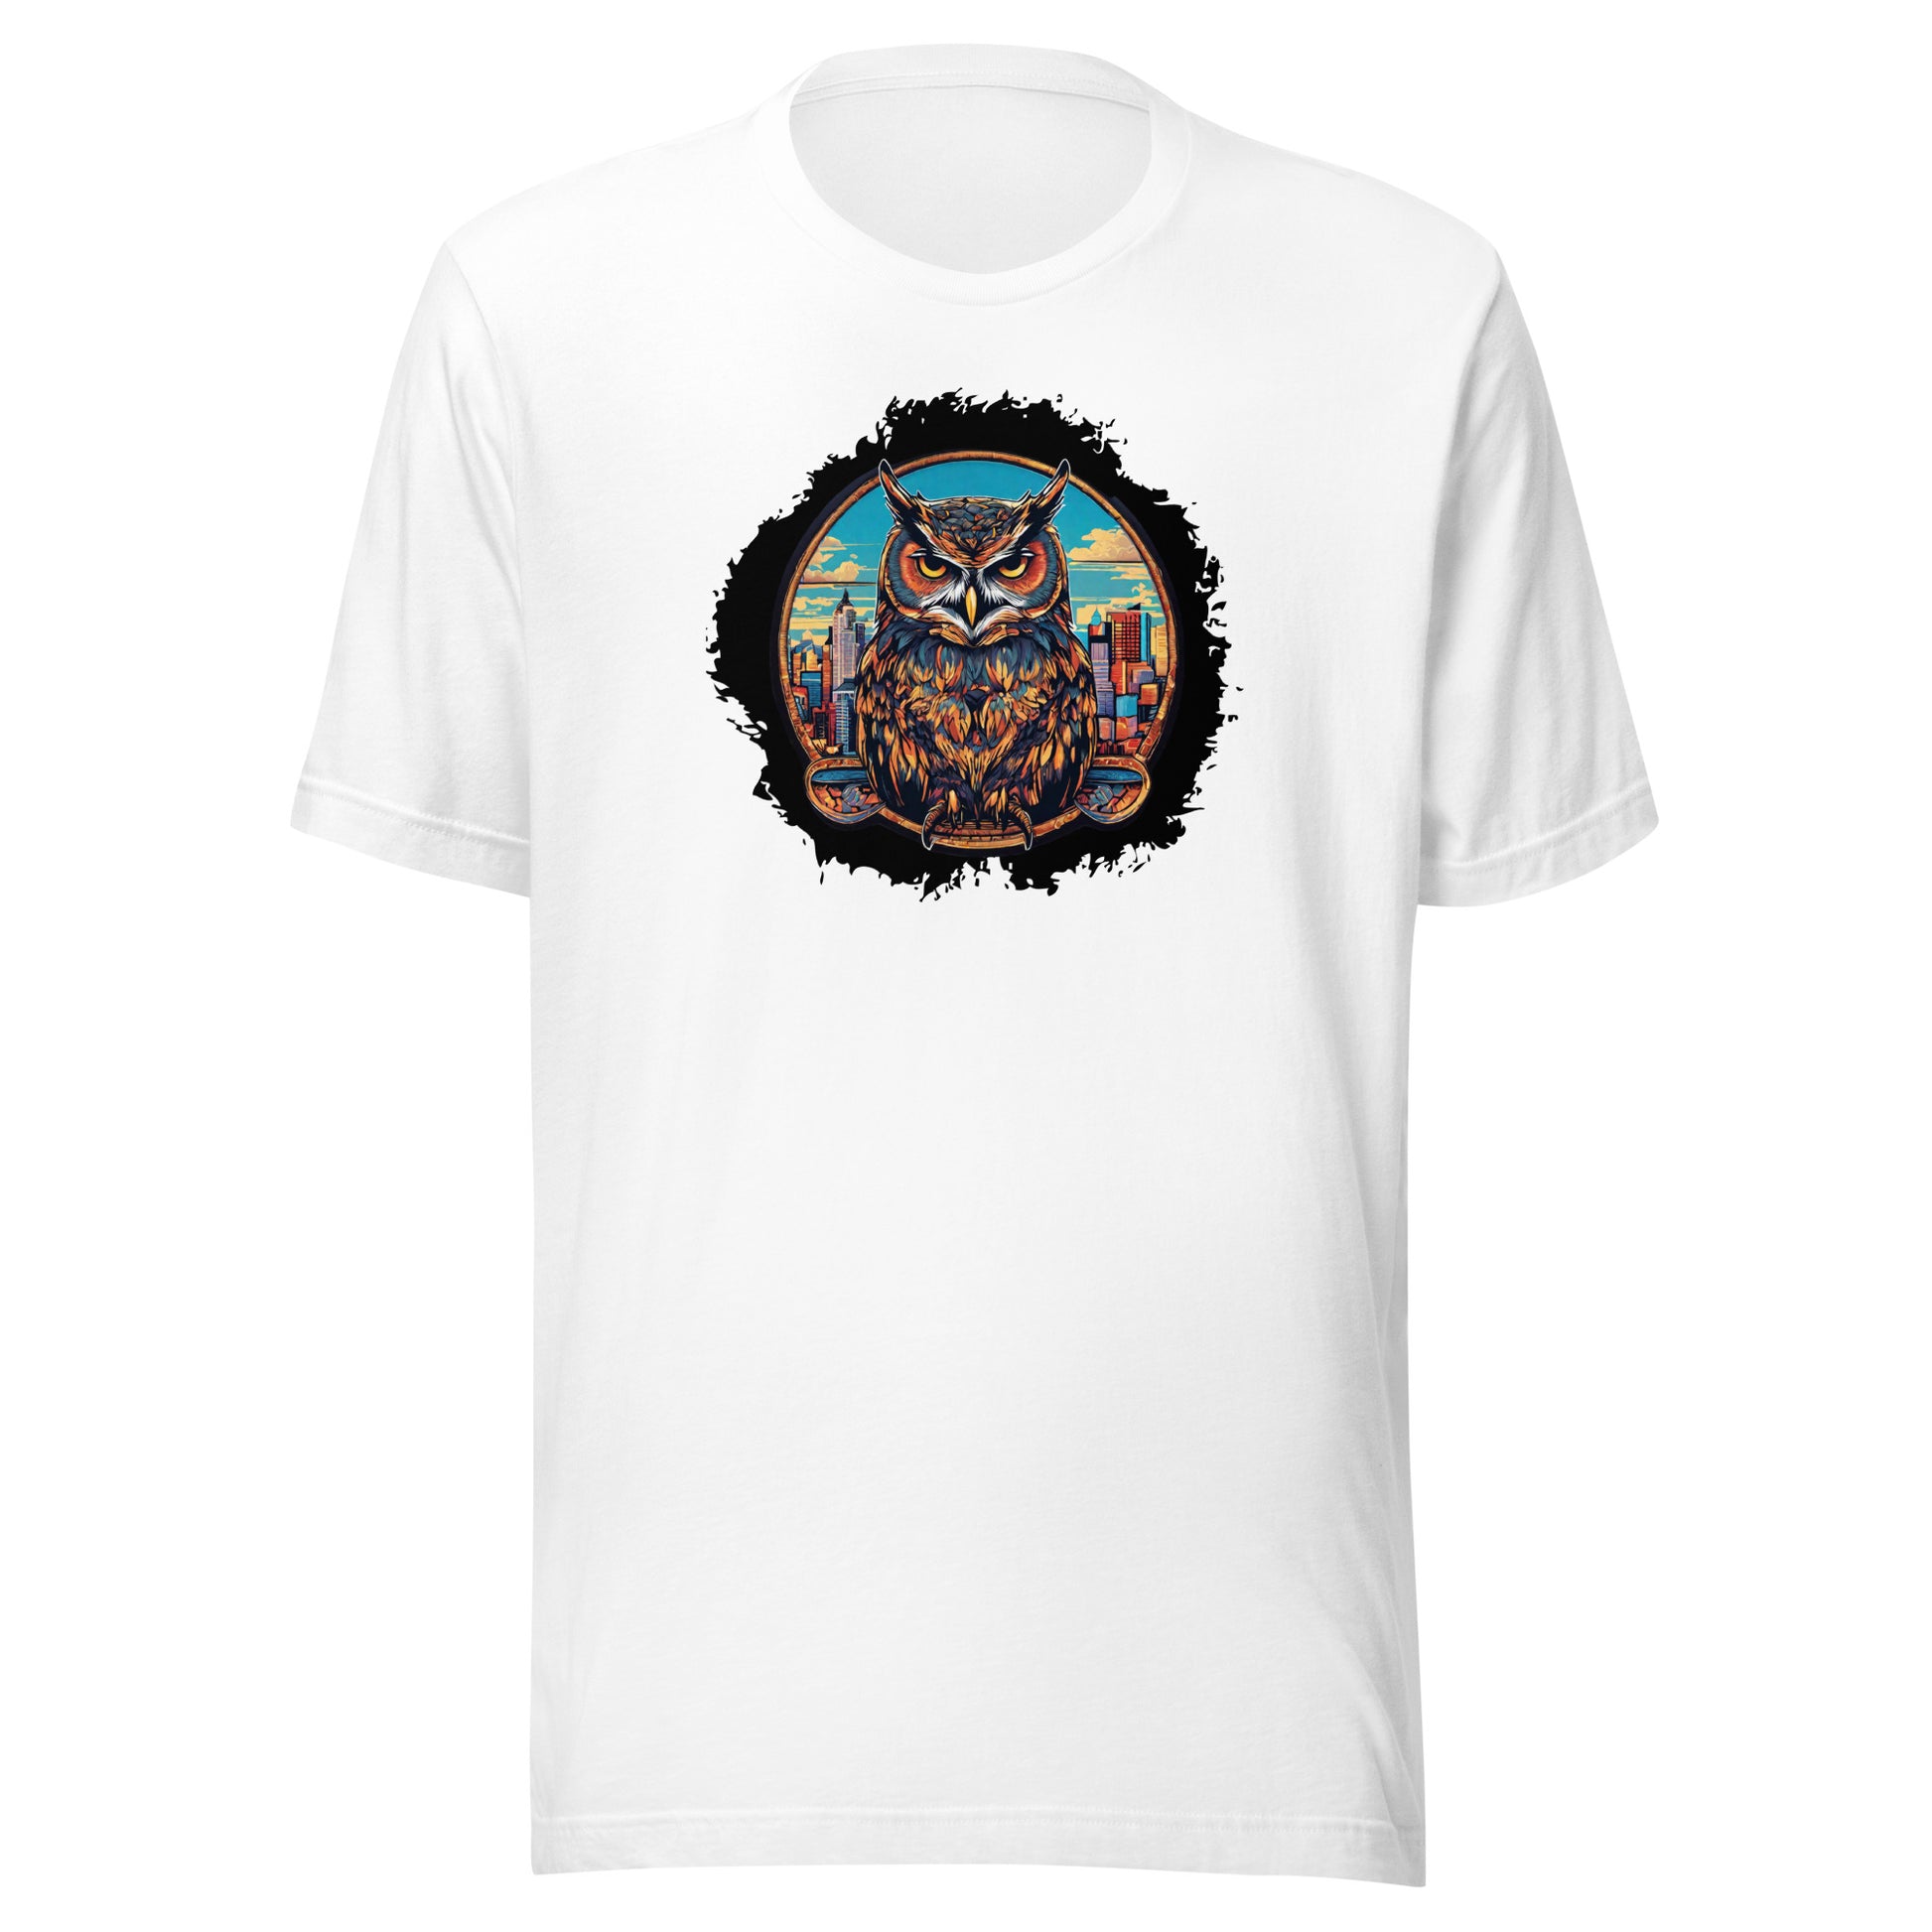 Owl in the City Emblem T-Shirt White